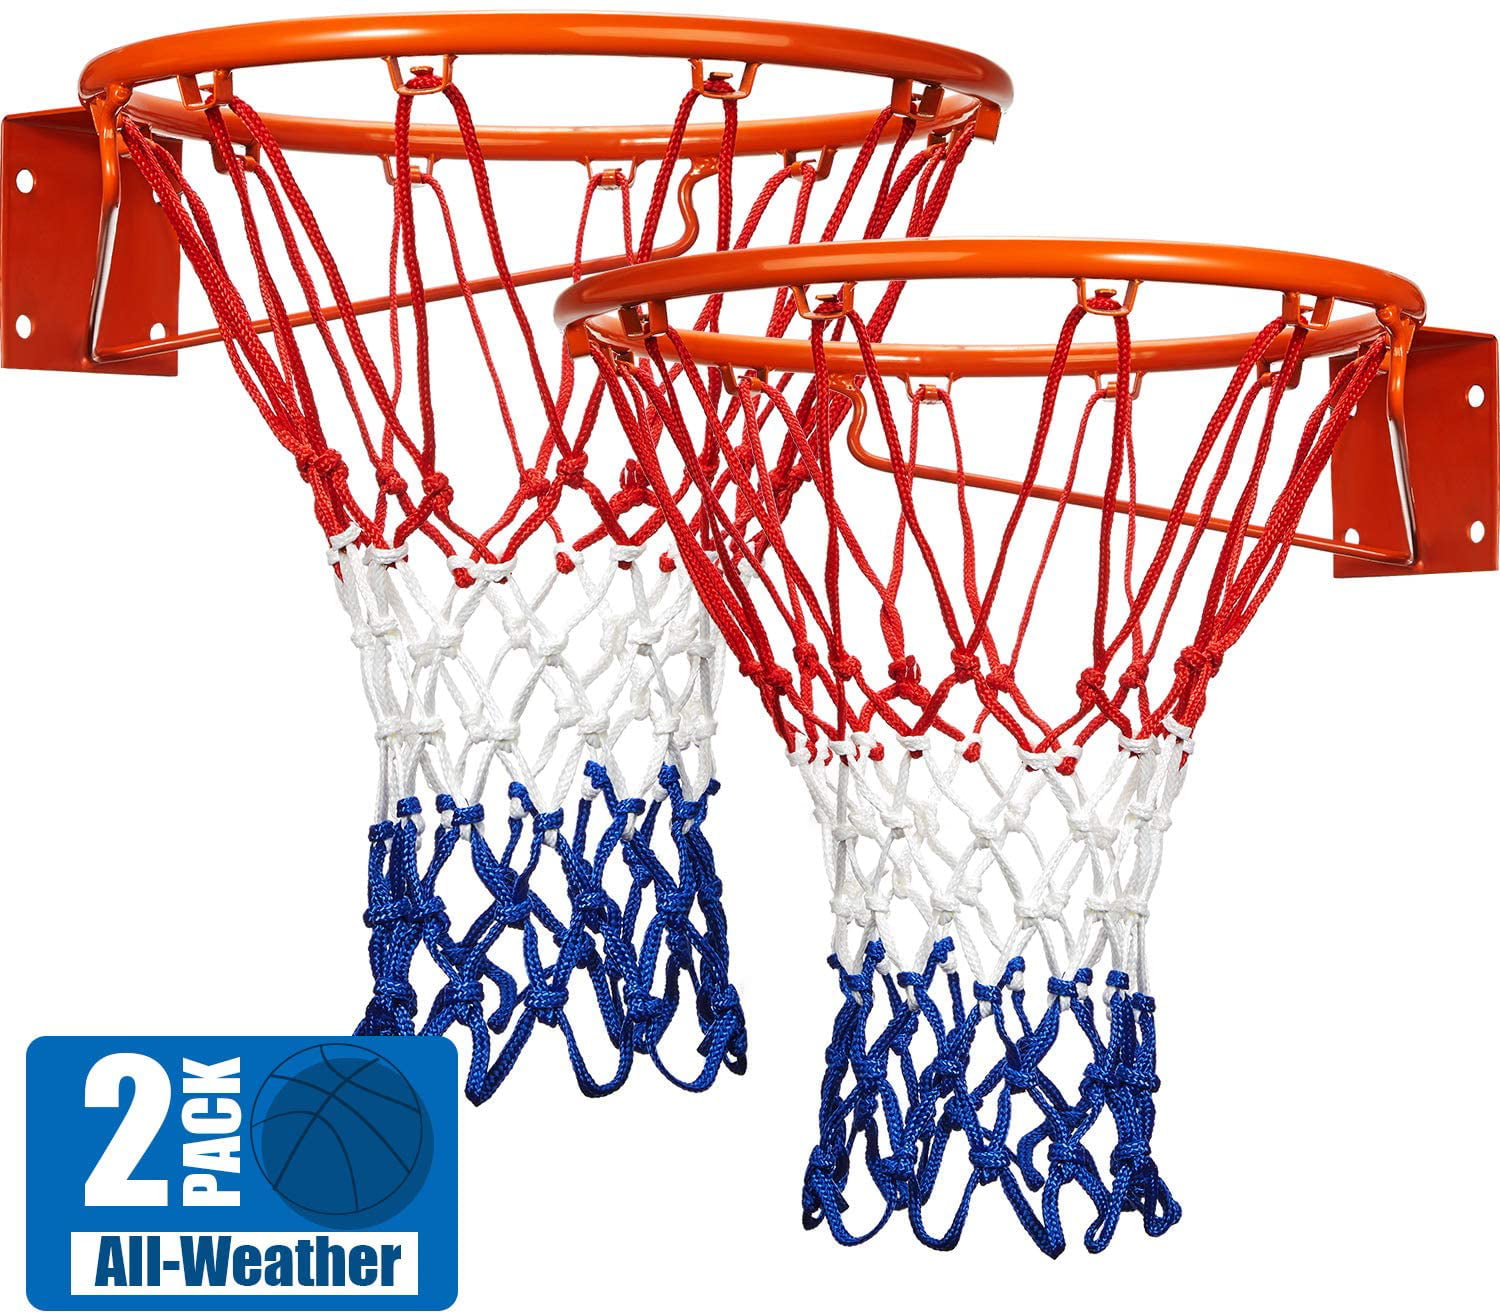 All Weather Anti Whip Ultra Sporting Goods Heavy Duty Basketball Net Replacement Fits Standard Indoor or Outdoor Rims 12 Loops 